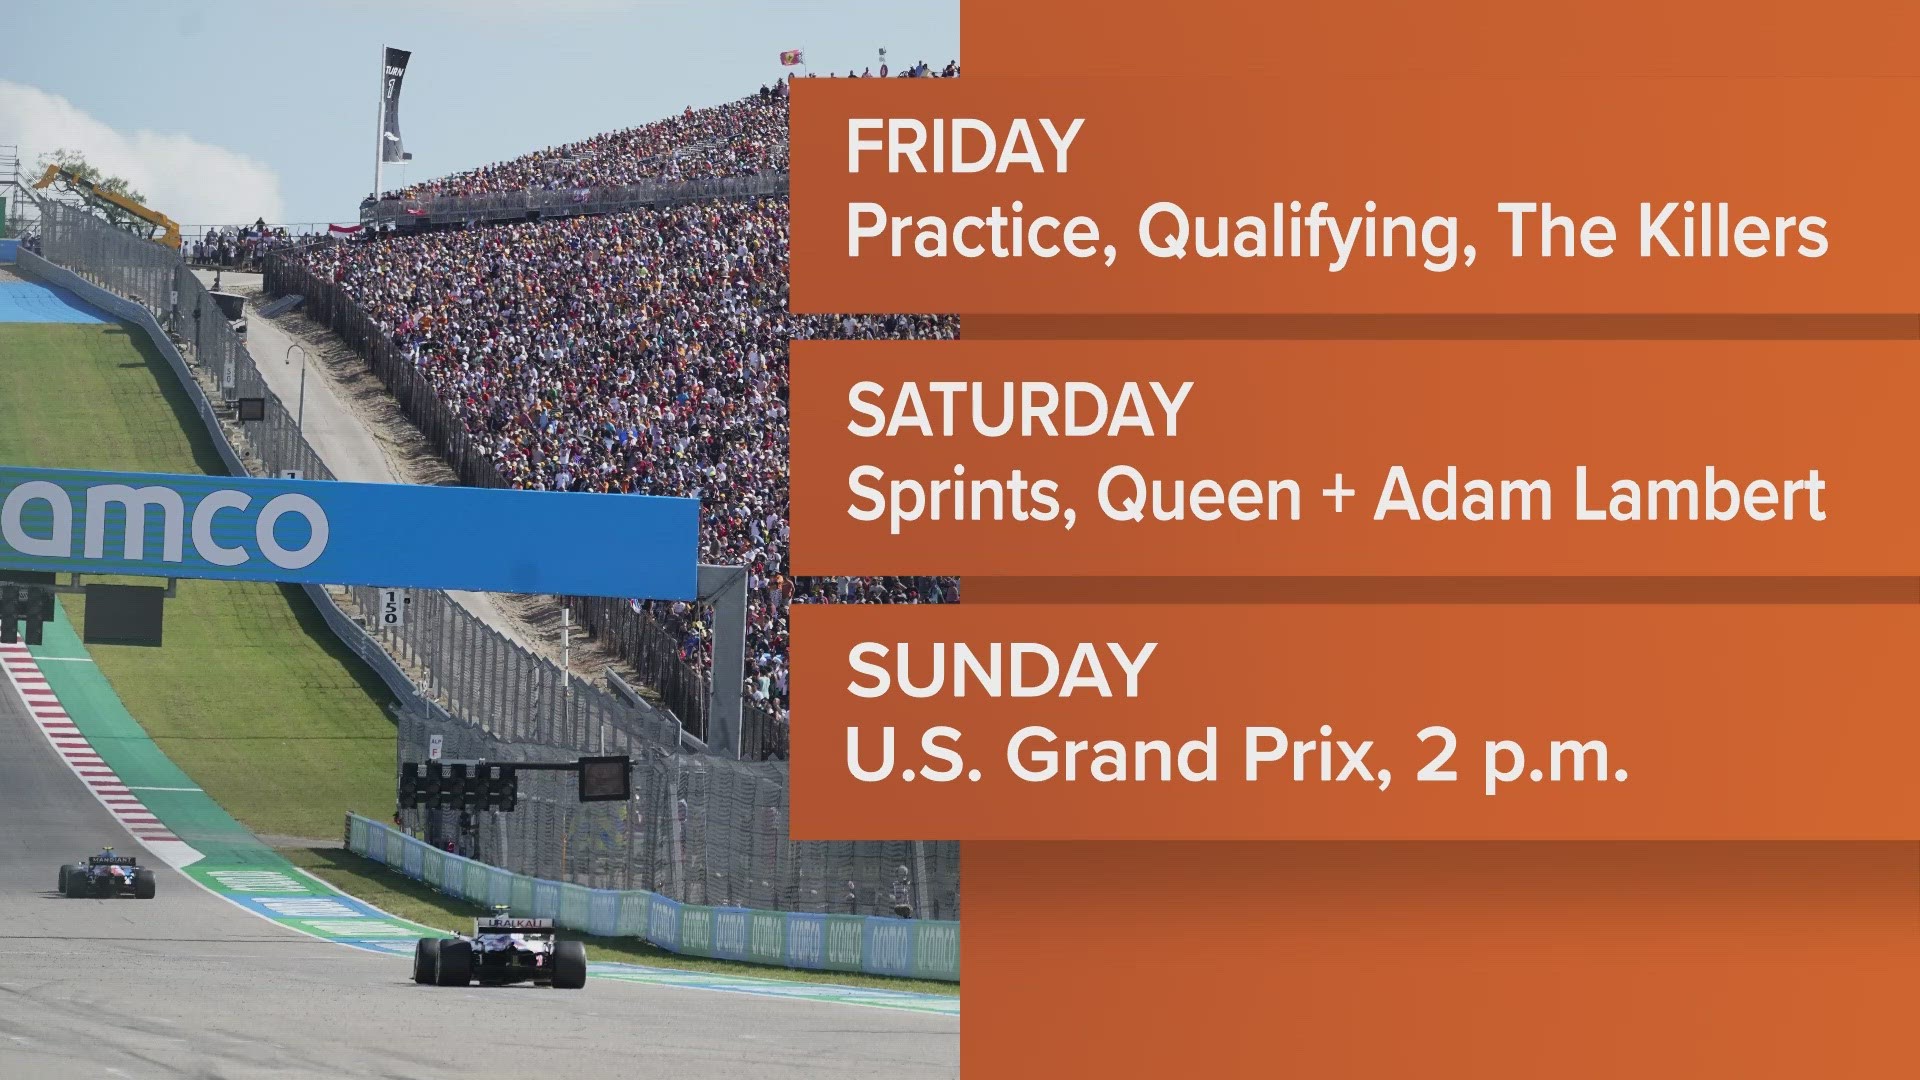 There are a lot of things happening for the F1 US Grand Prix at the Circuit of the Americas.